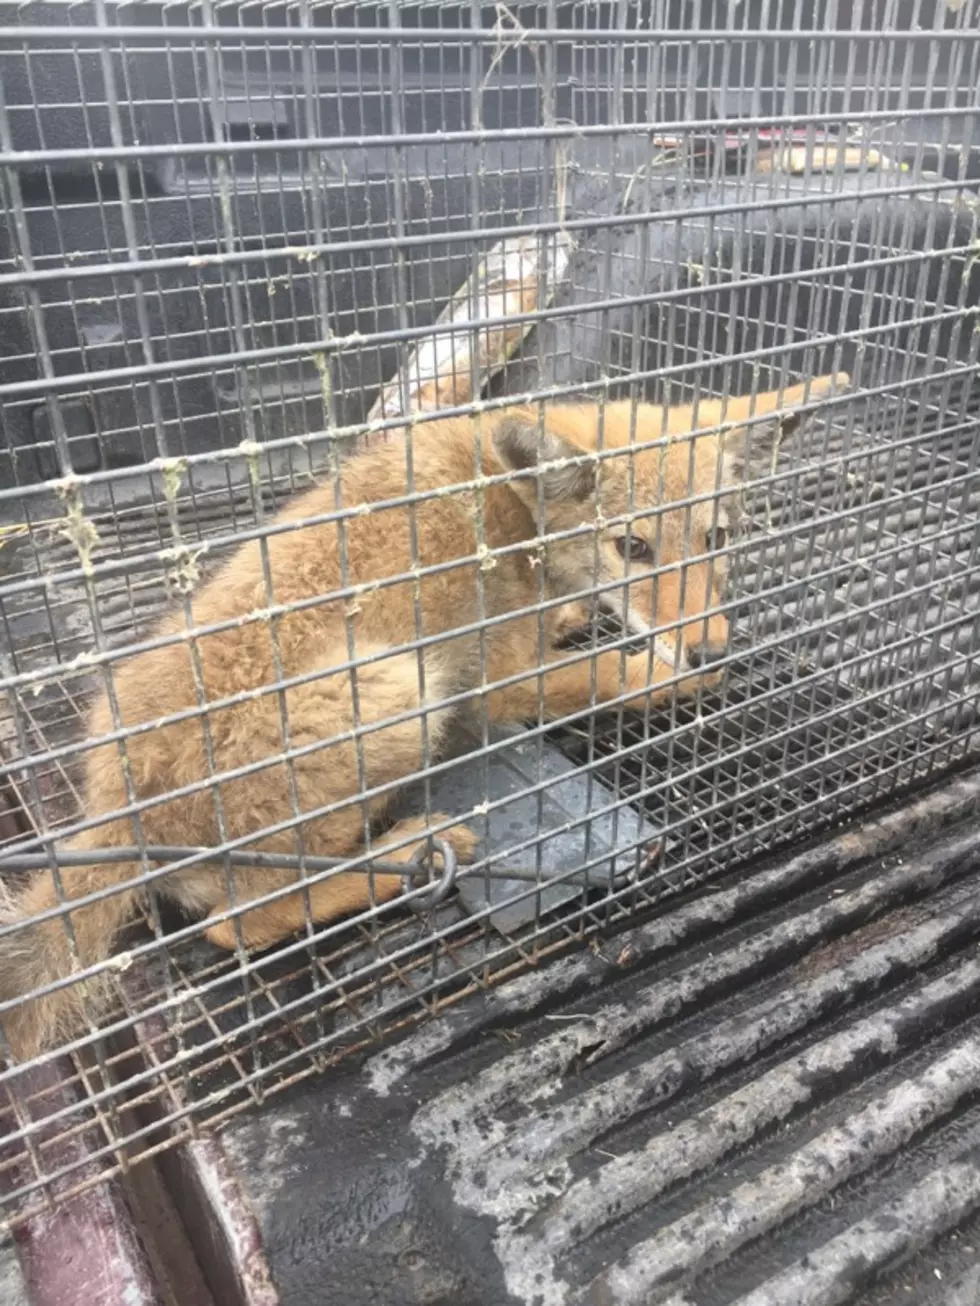 UPDATE–Coyote Found in Kennewick Home was Drowned, Says Trapper